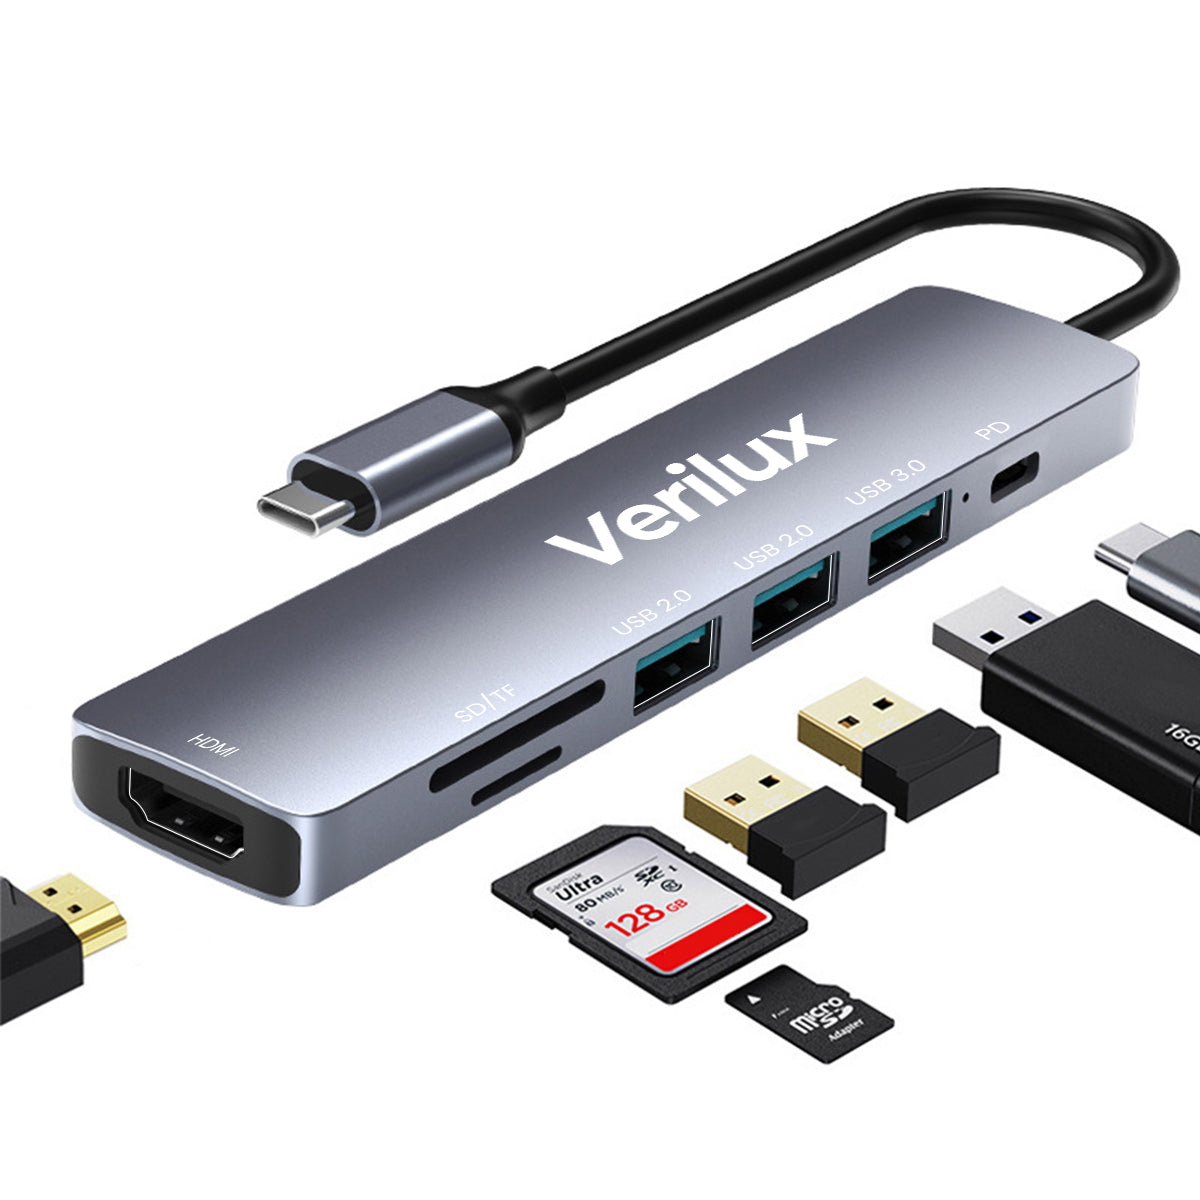 Verilux USB C Hub Multiport Adapter 7 in 1 Aluminum Type C Hub with 4K HDMI Output, USB 2.0/3.0 Ports, SD/Micro SD Card Reader, PD100W Compatible for MacBook Pro/ Air M1, XPS, Surface Pro and More